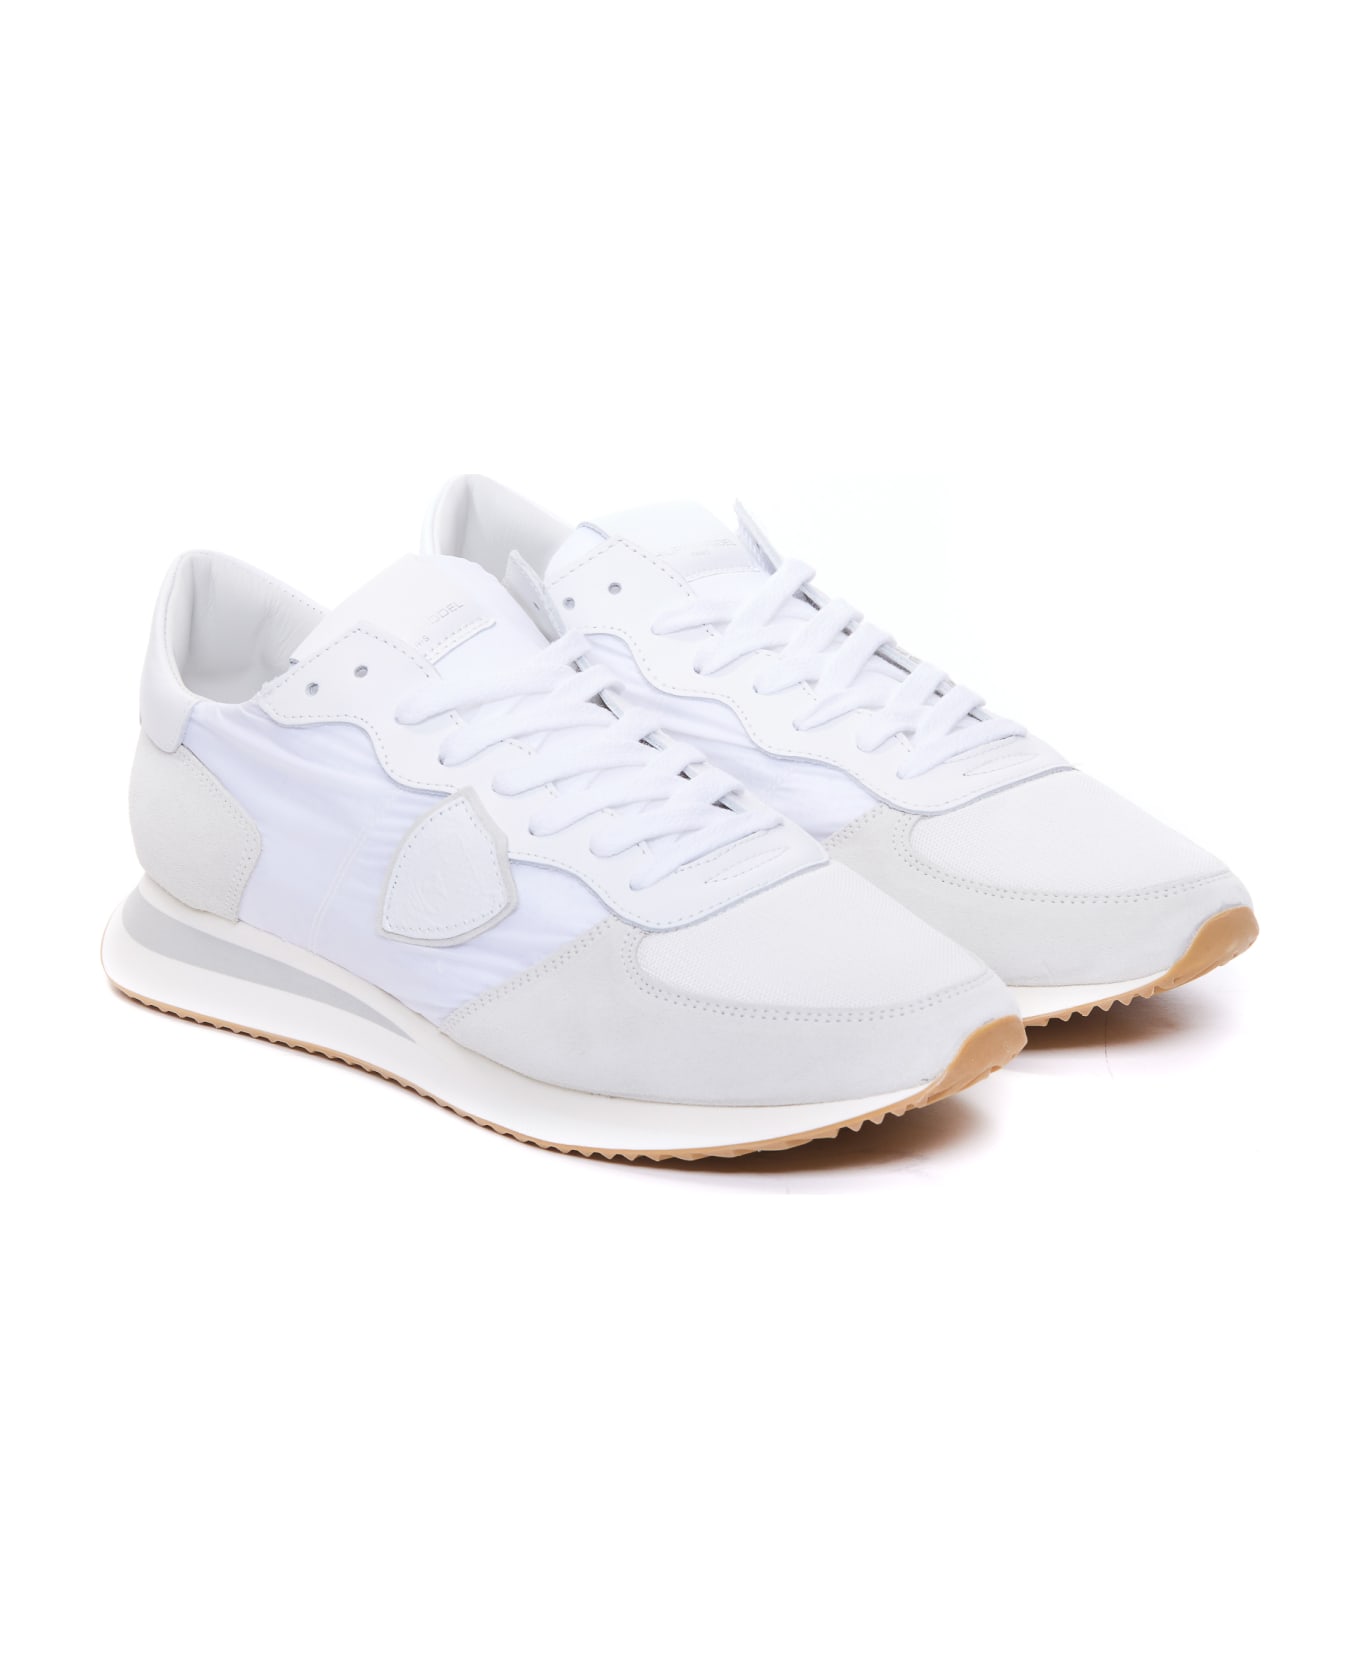 Philippe Model Tropez Low Sneakers - White スニーカー